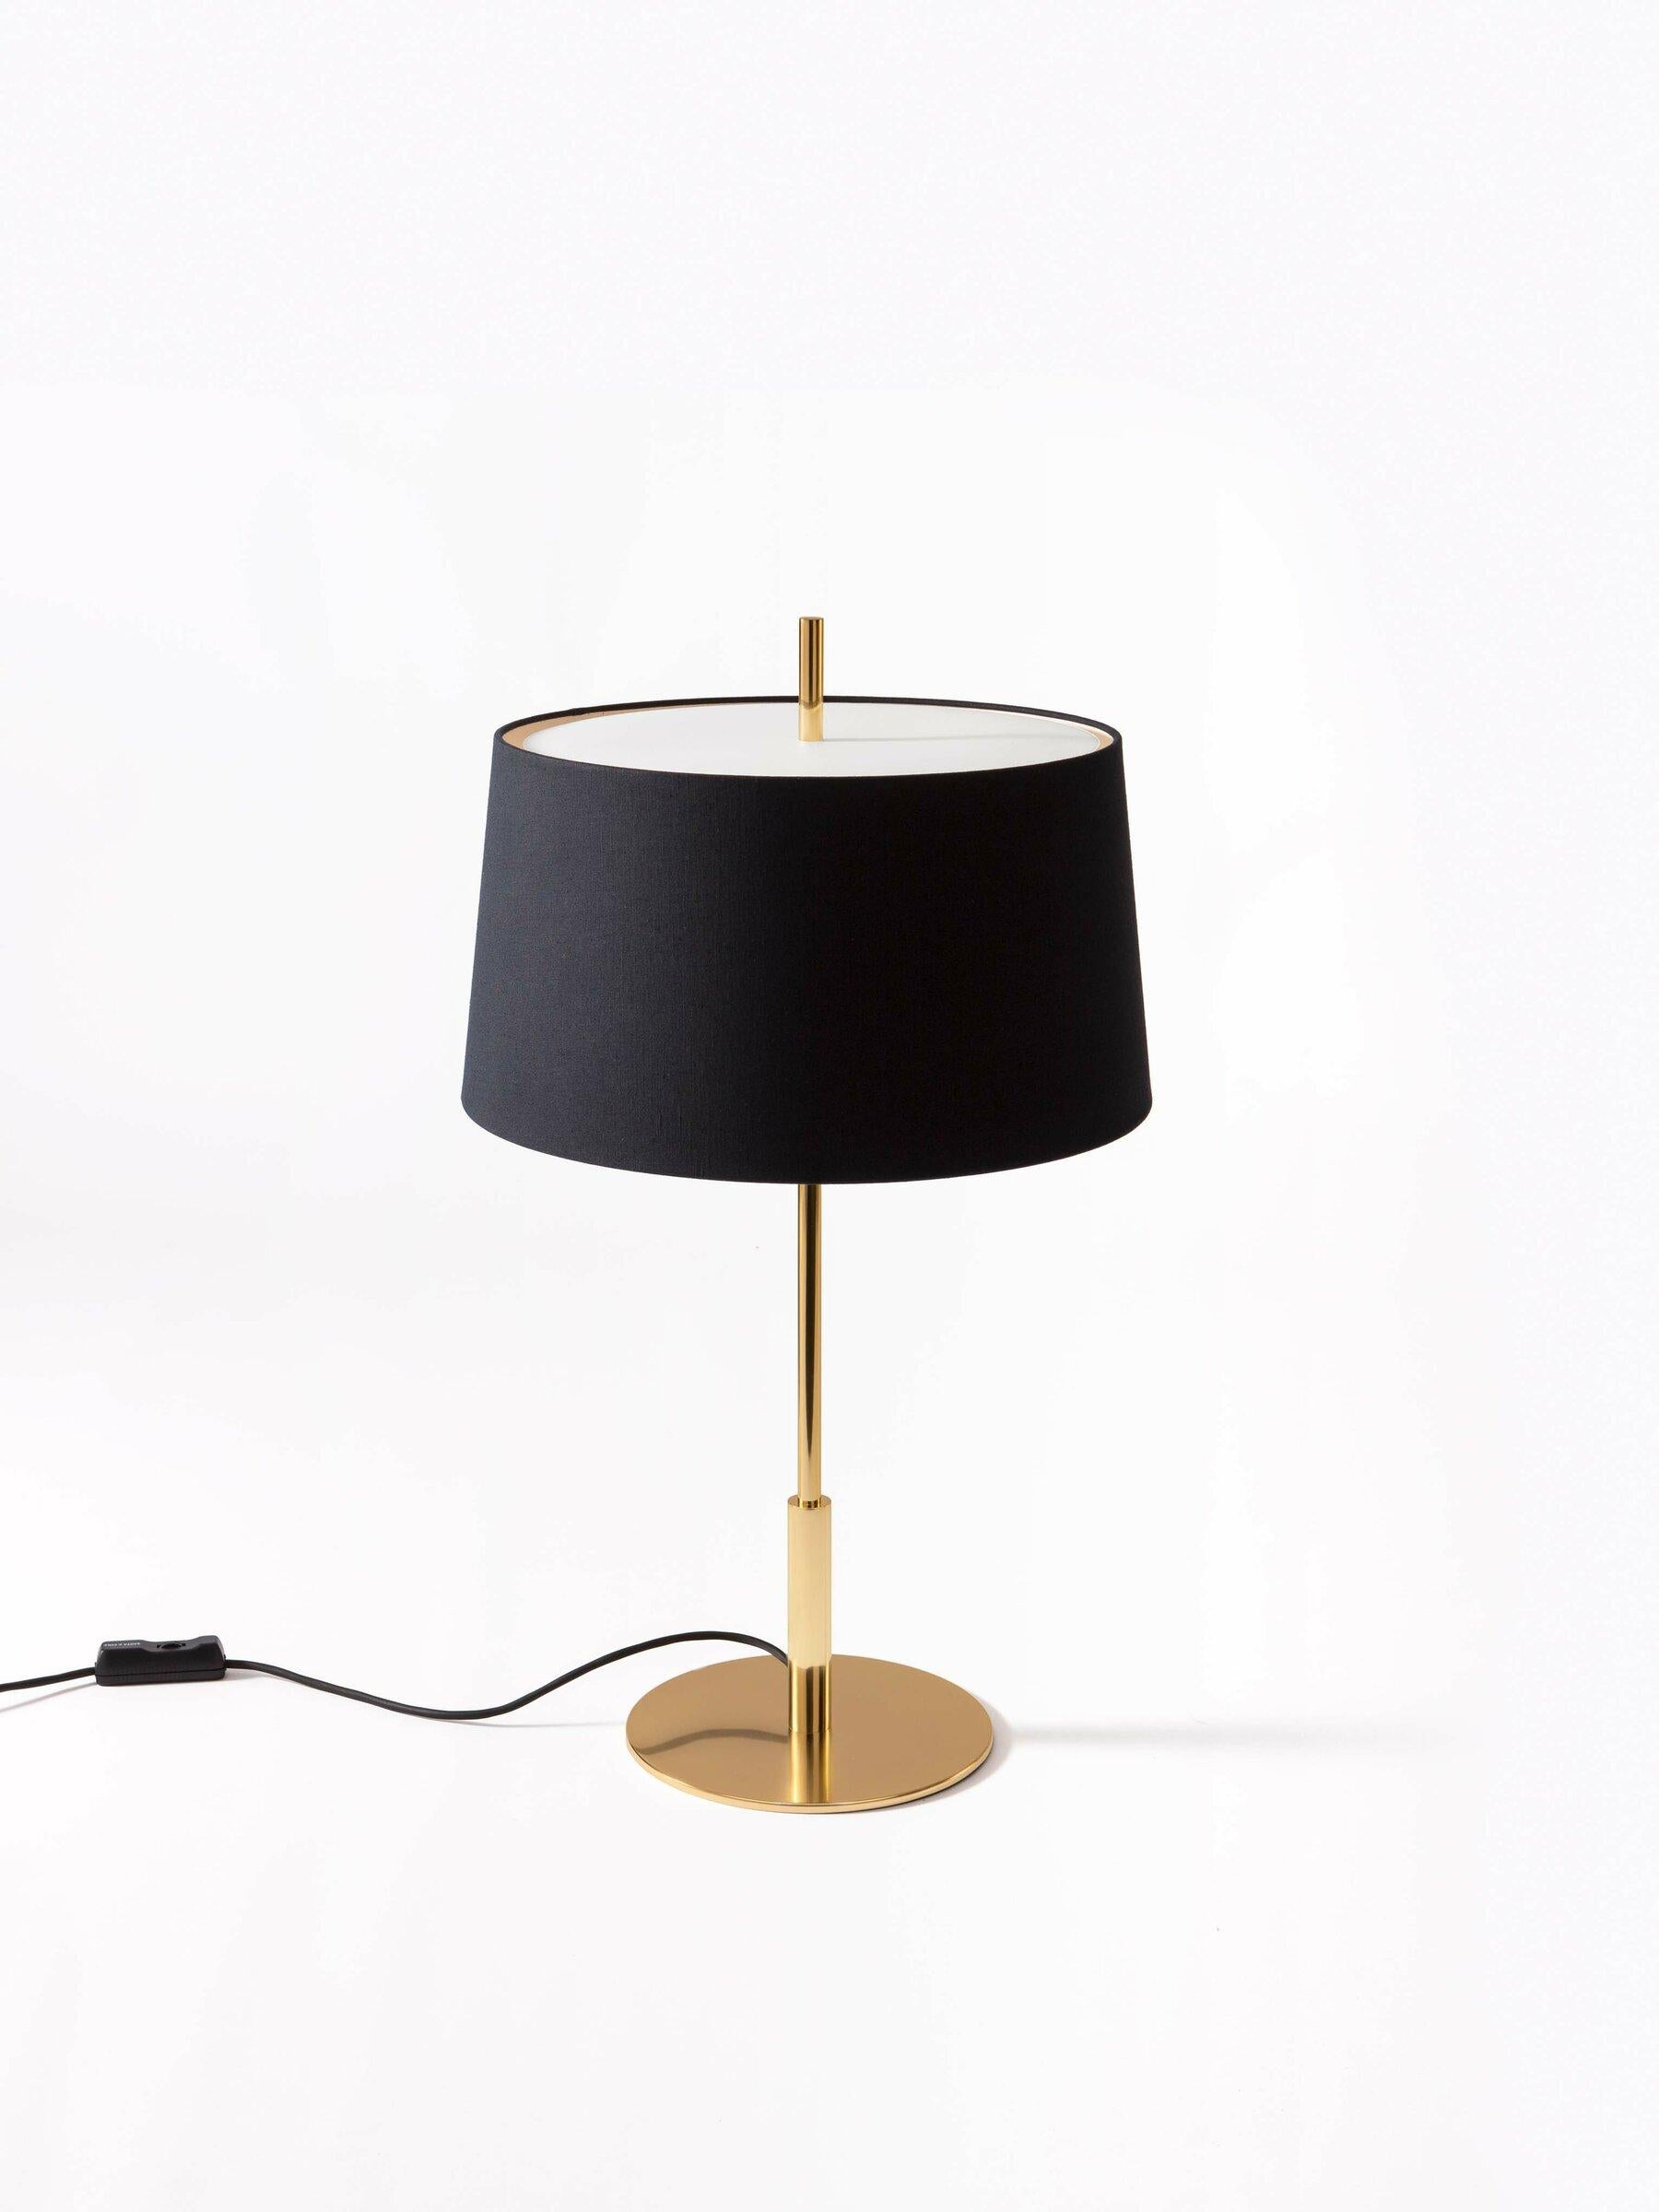 Gold Diana table lamp by Federico Correa, Alfonso Milá, Miguel Milá
Dimensions: D 45 x H 78 cm
Materials: black linen, metal.
Available in black or white lampshade and in gold or nickel finish.

In keeping with the calling of its creators, the